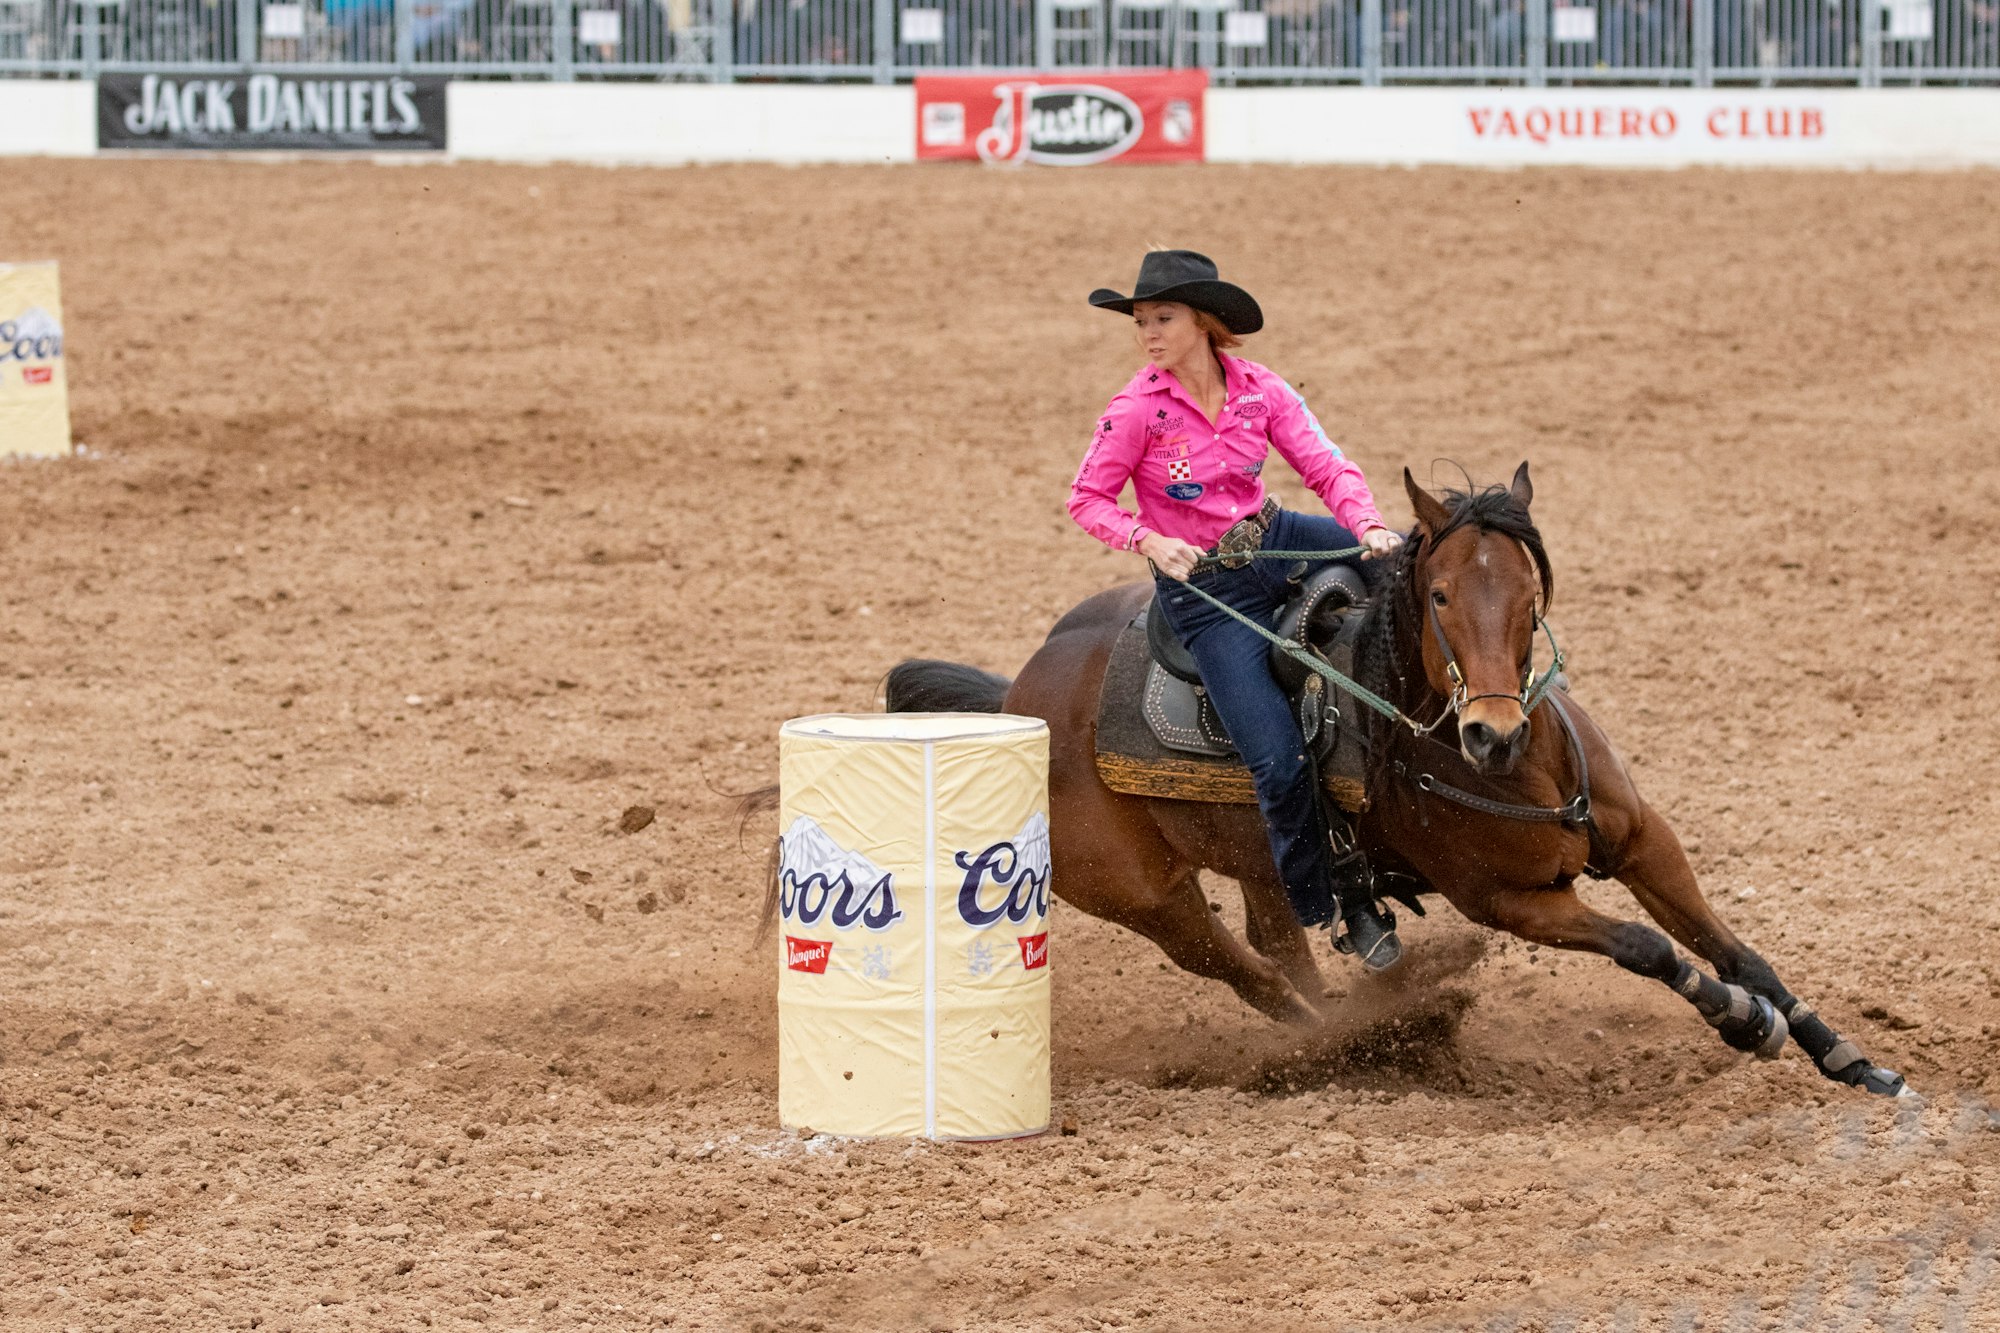 Emily Miller and her horse make a tight turn around a barrel before taking first place in barrel racing.